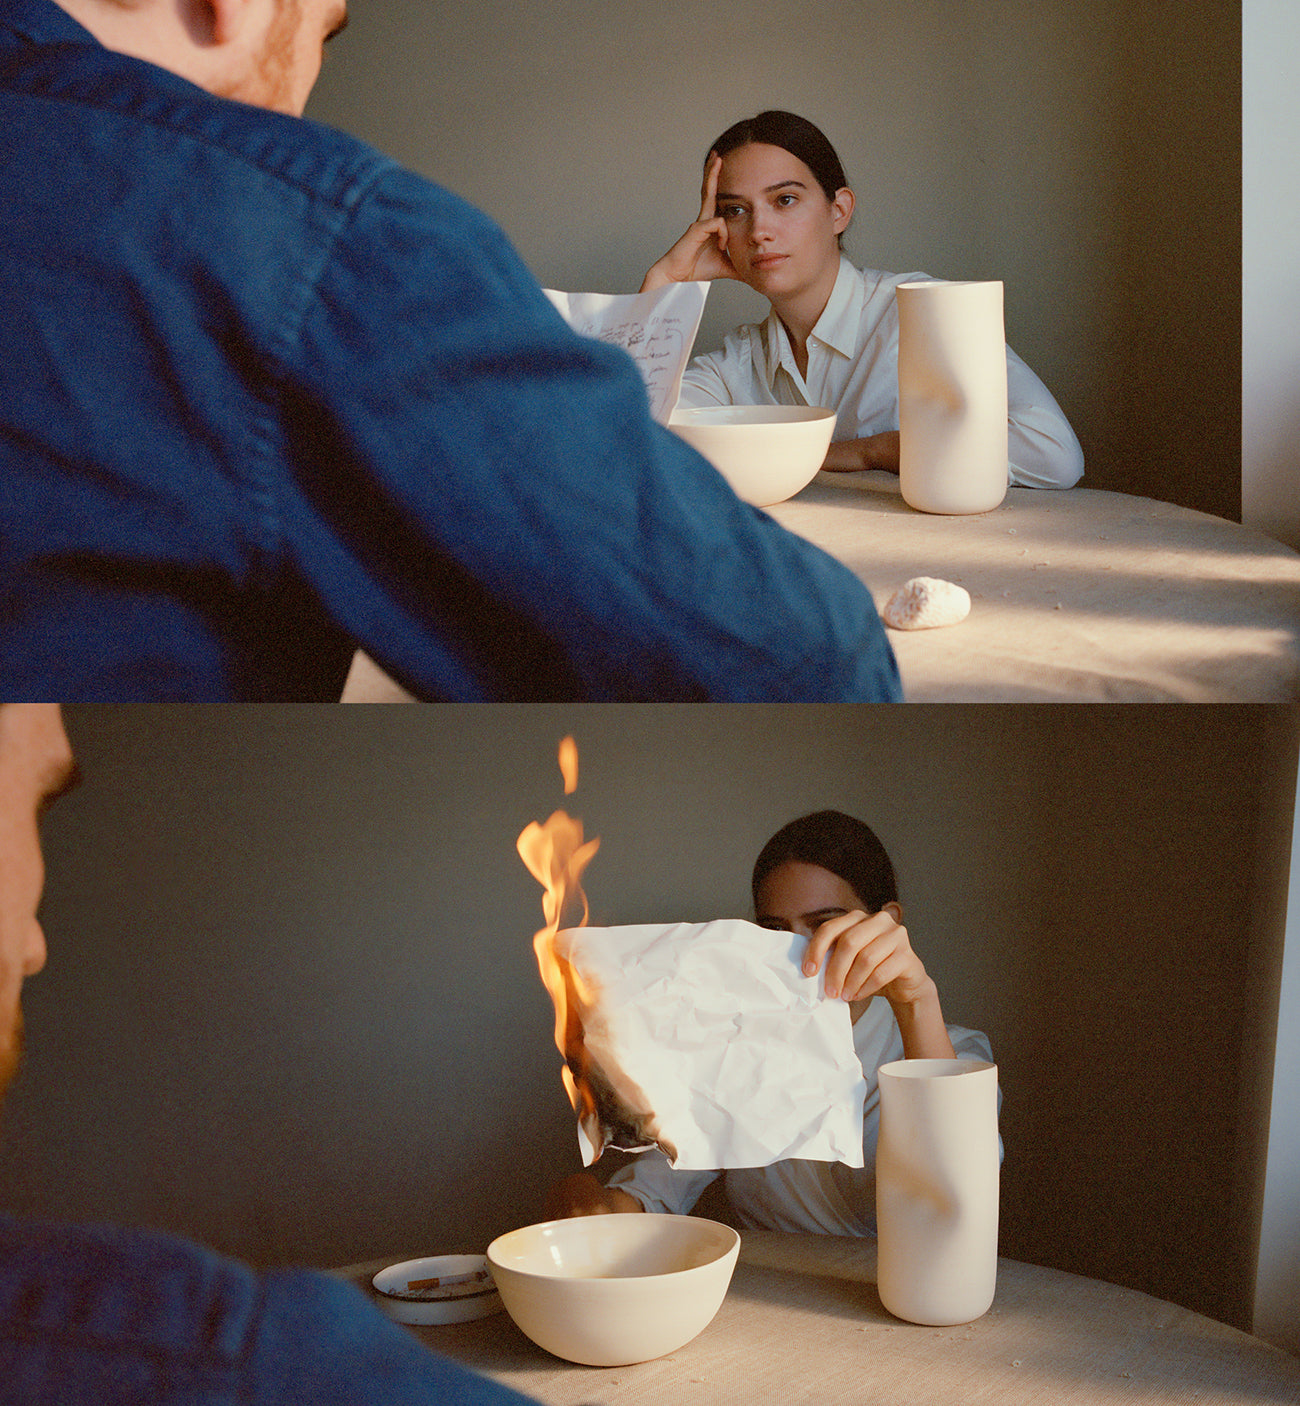 woman burning paper with hand-formed vase and bowl beside her